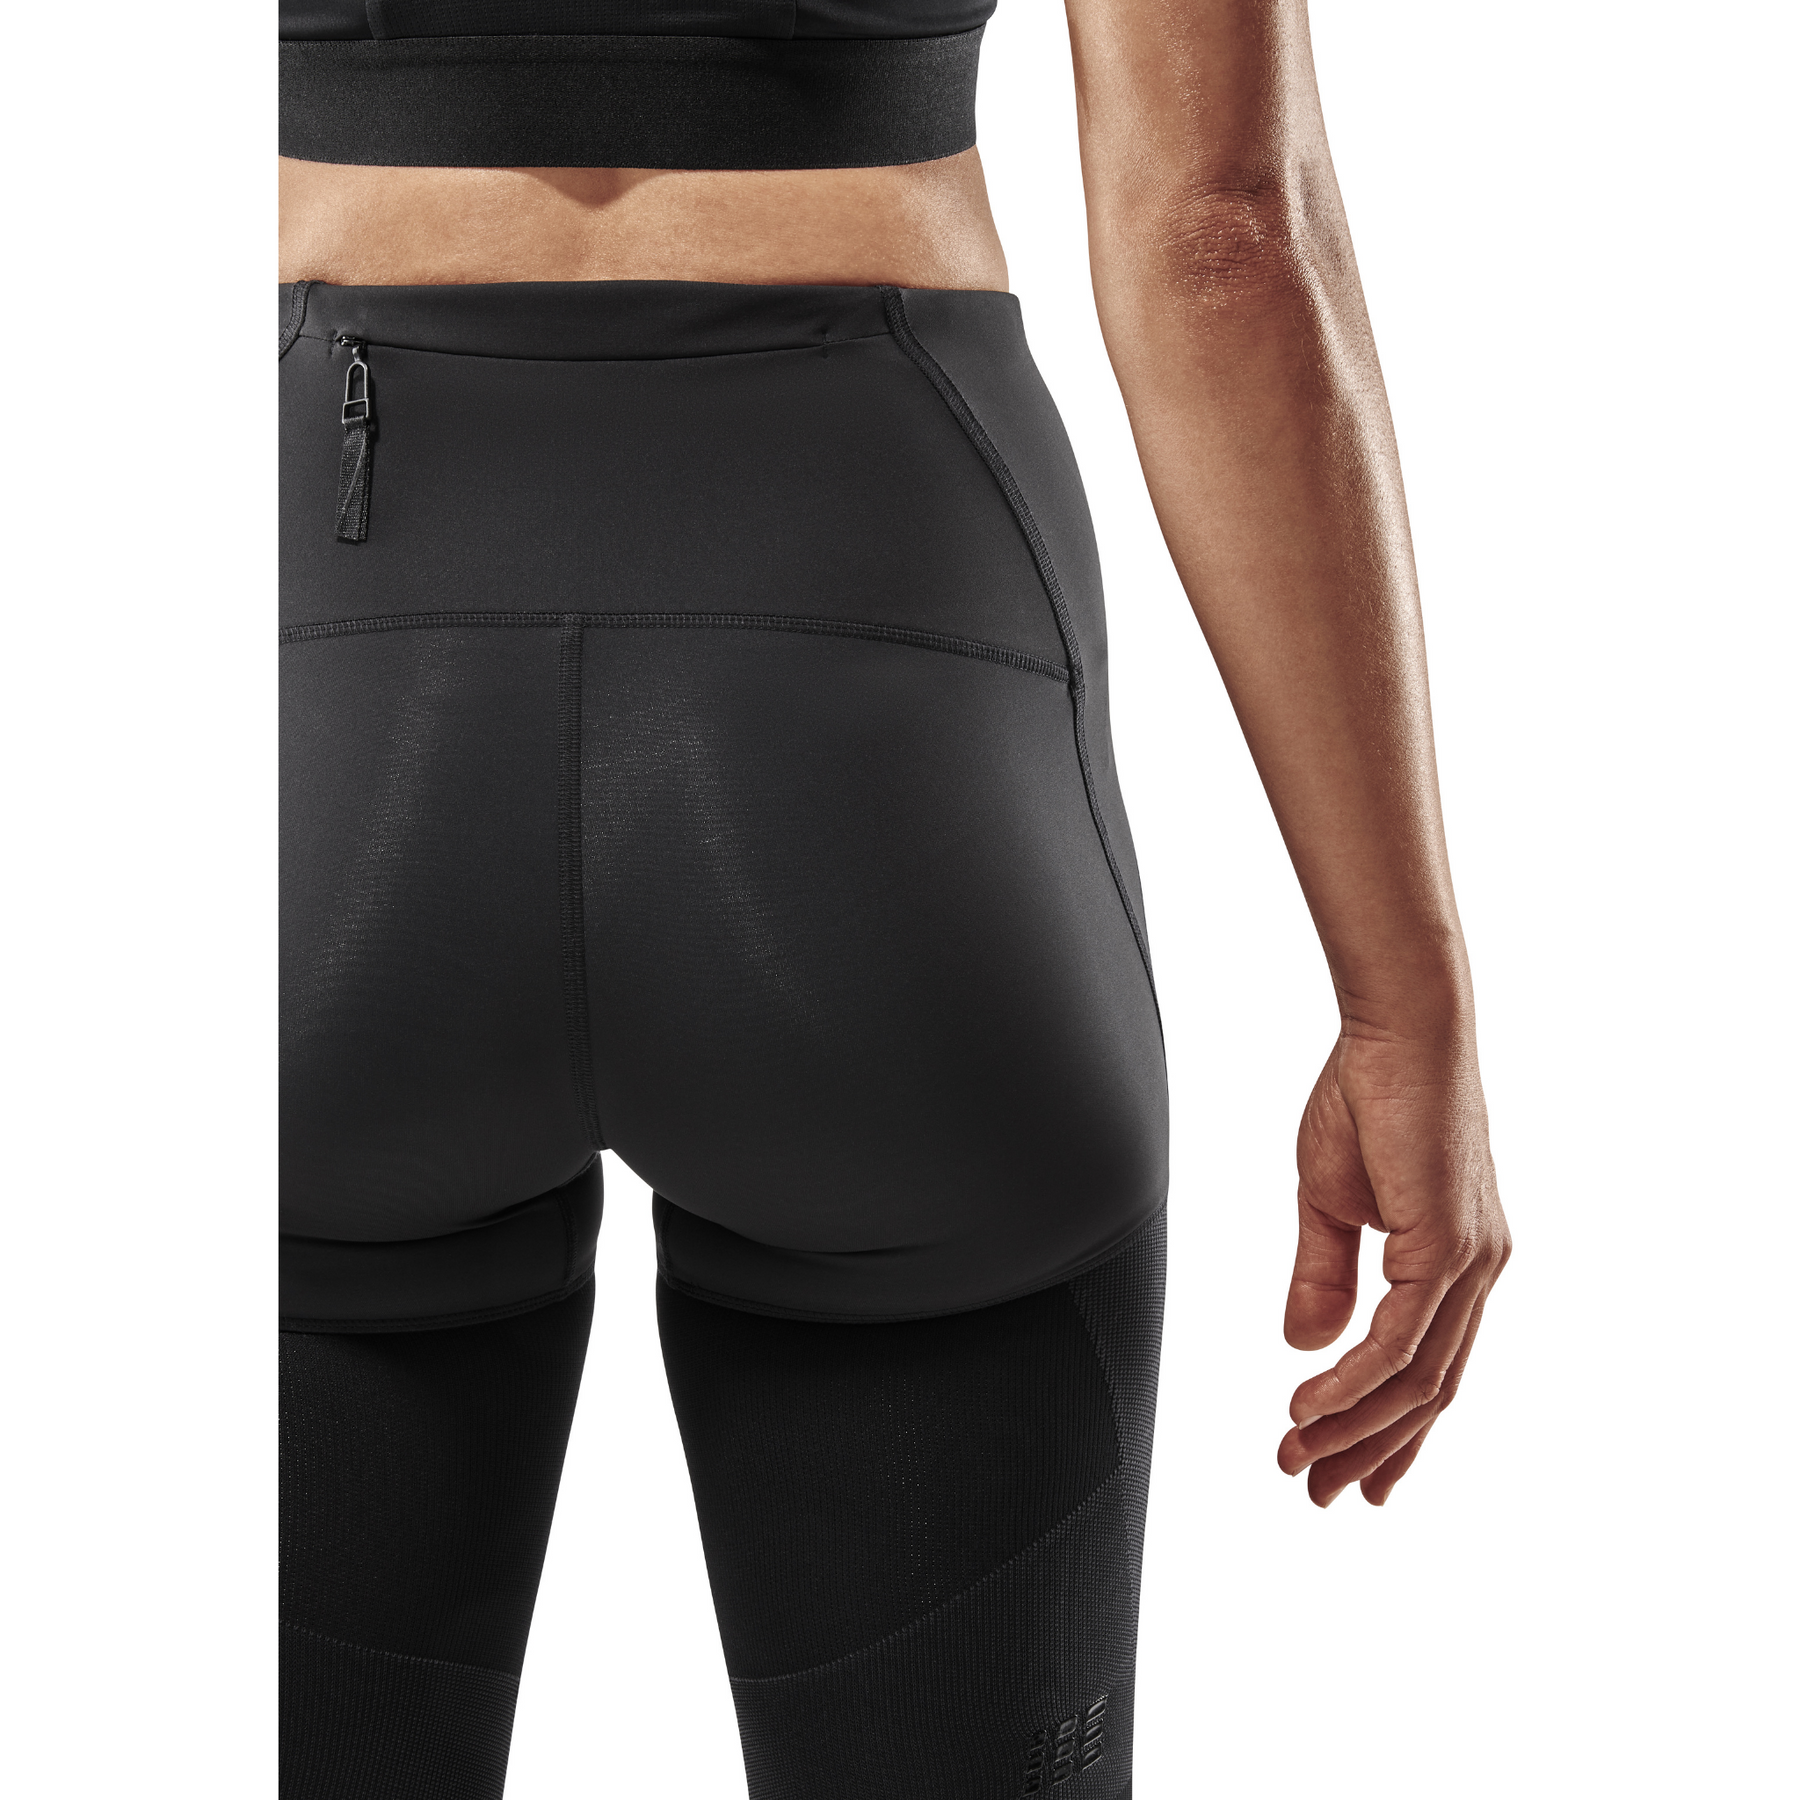 Compression | Women – Shorts 4.0 Activating Sportswear Run Compression for CEP CEP